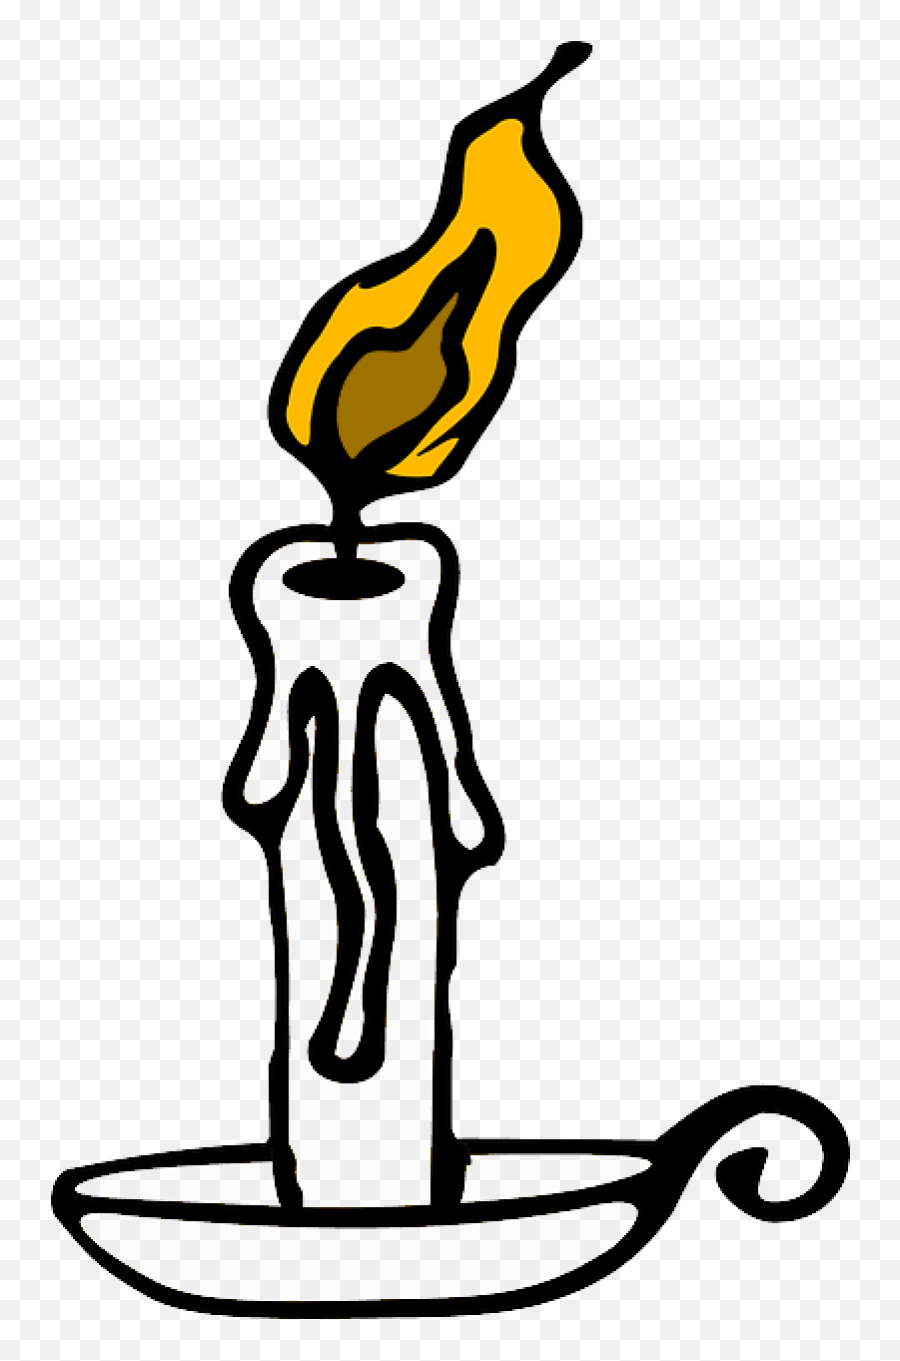 Candle Outline Yellow Fire Cartoon - Candle Clipart Emoji,Lit Wallpaper Emojis